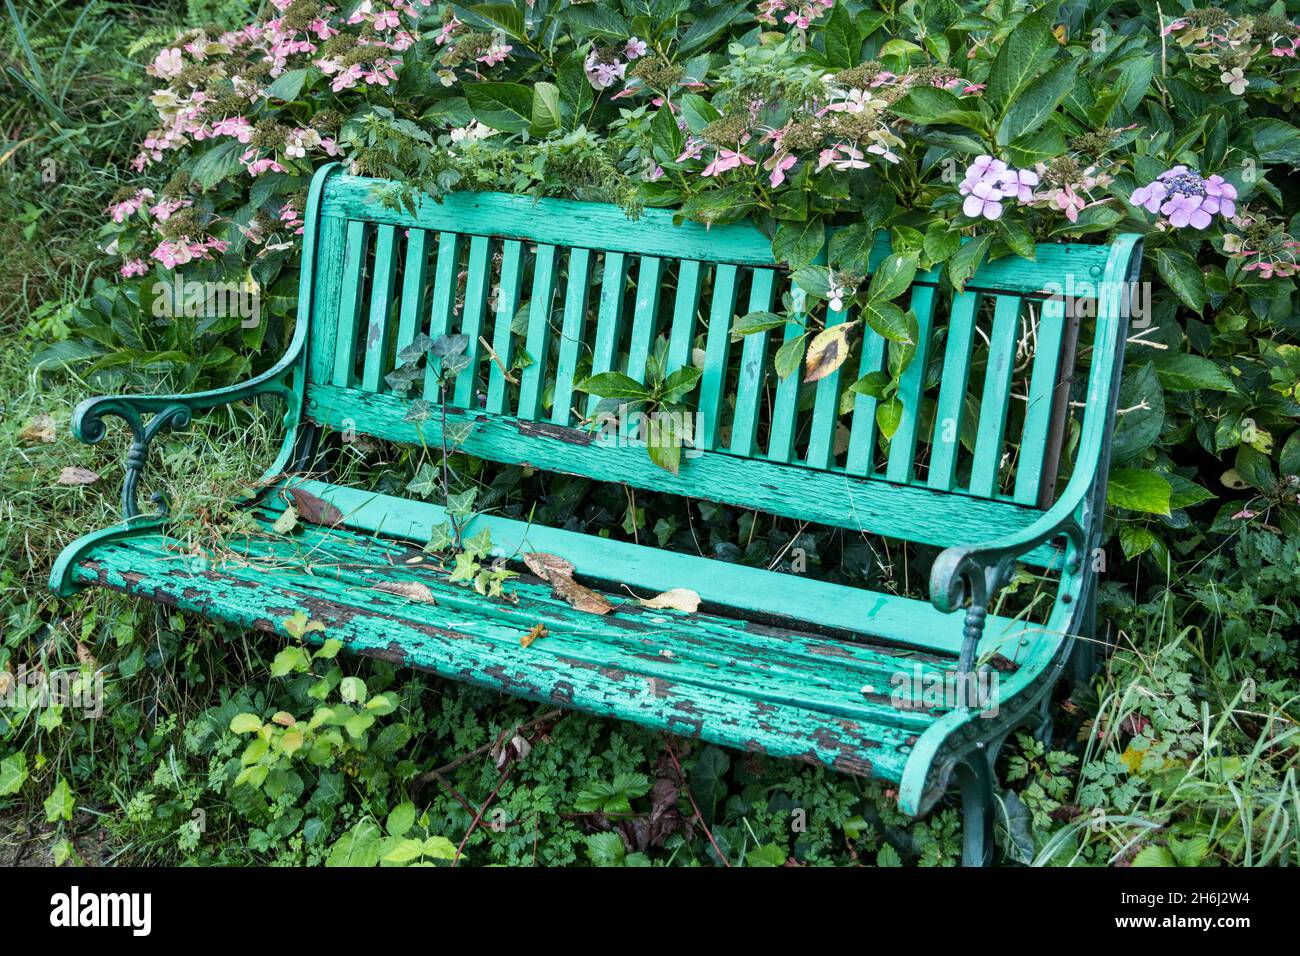 Green painted garden bench in decay Stock Photo